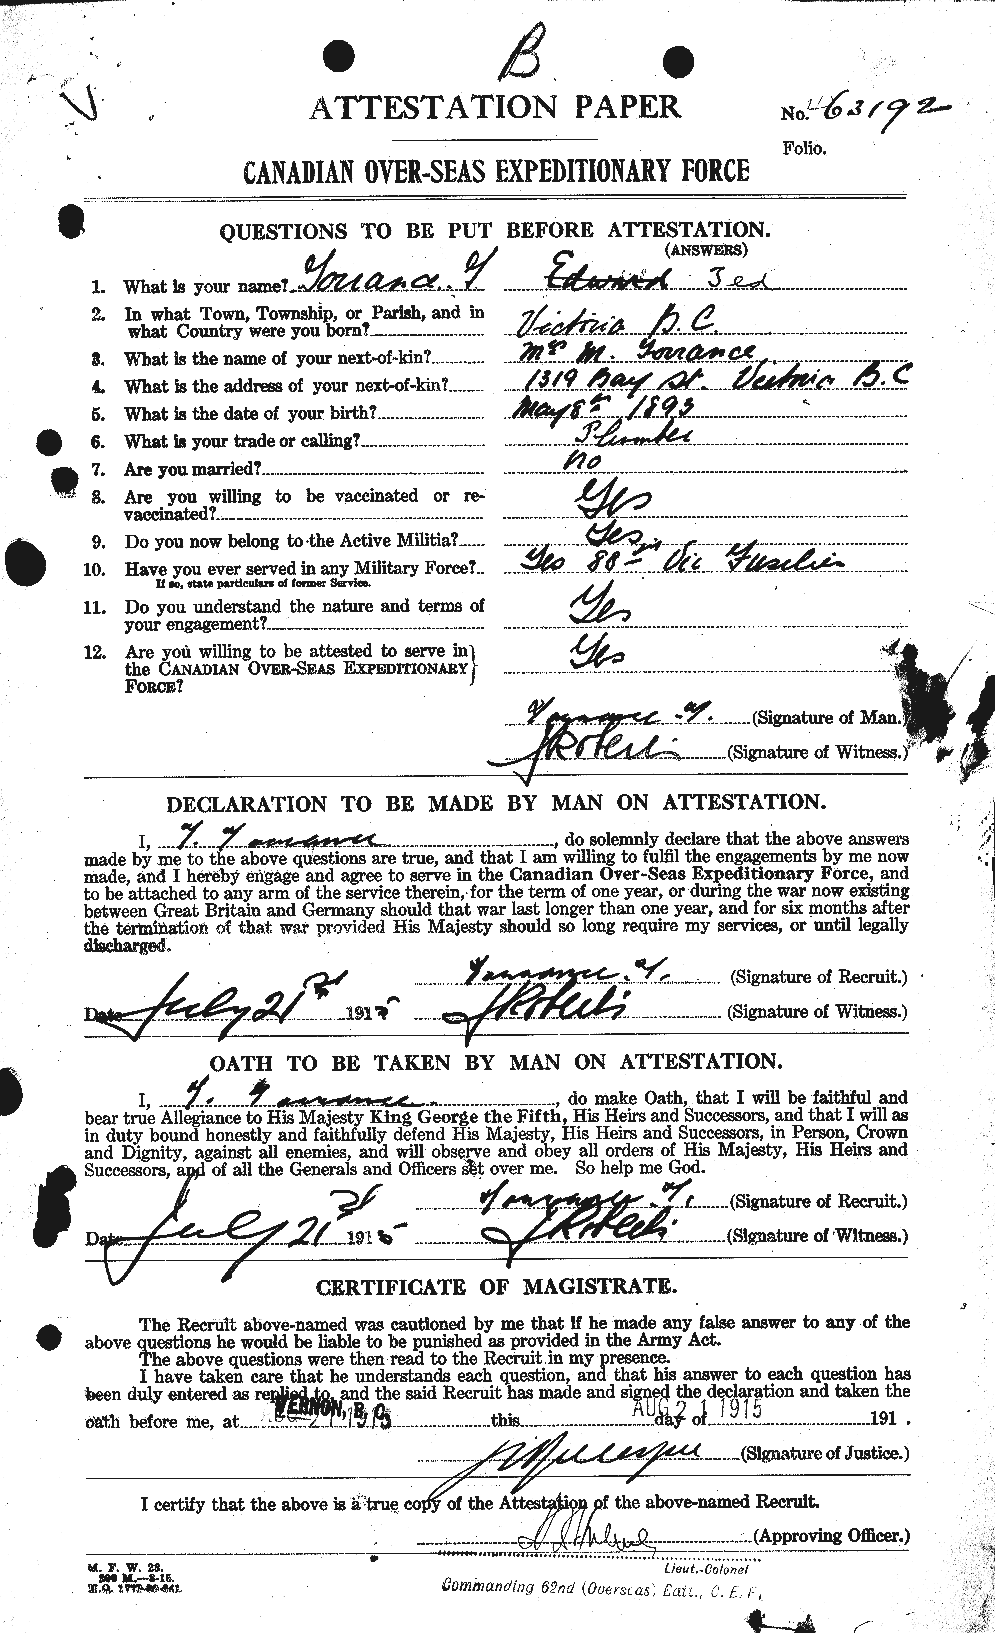 Personnel Records of the First World War - CEF 645964a